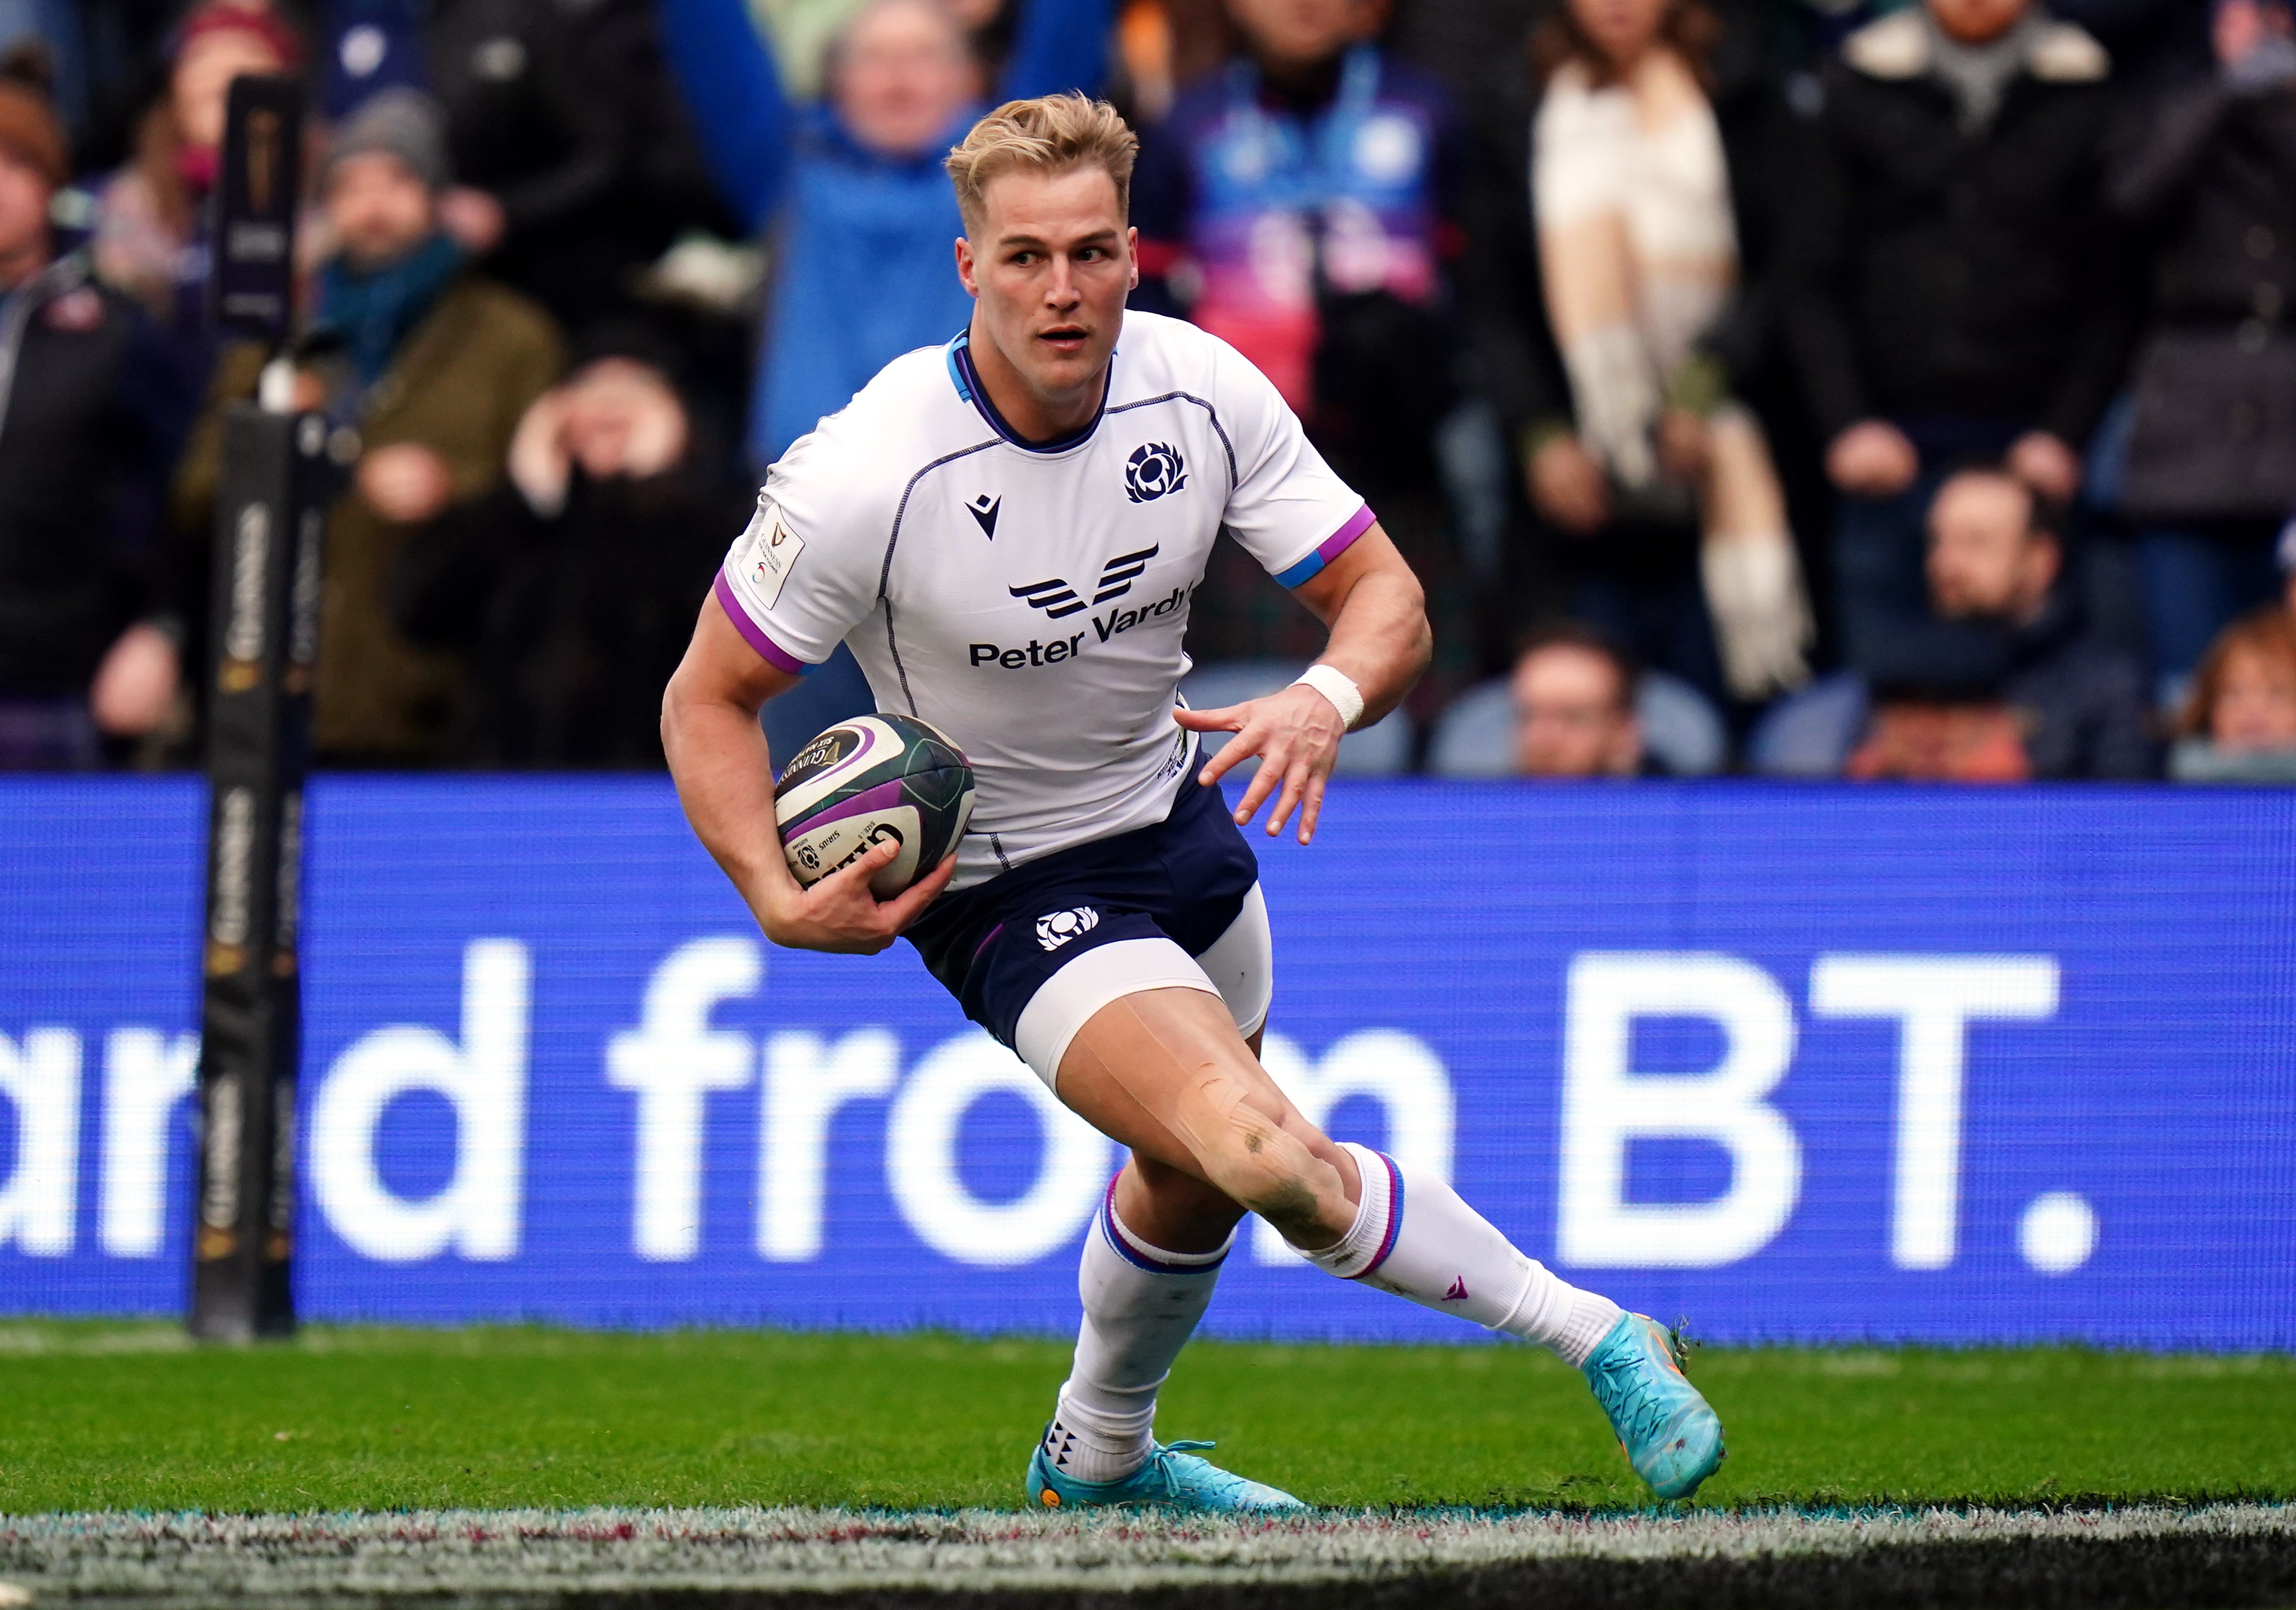 Duhan van der Merwe scored a late try for Scotland